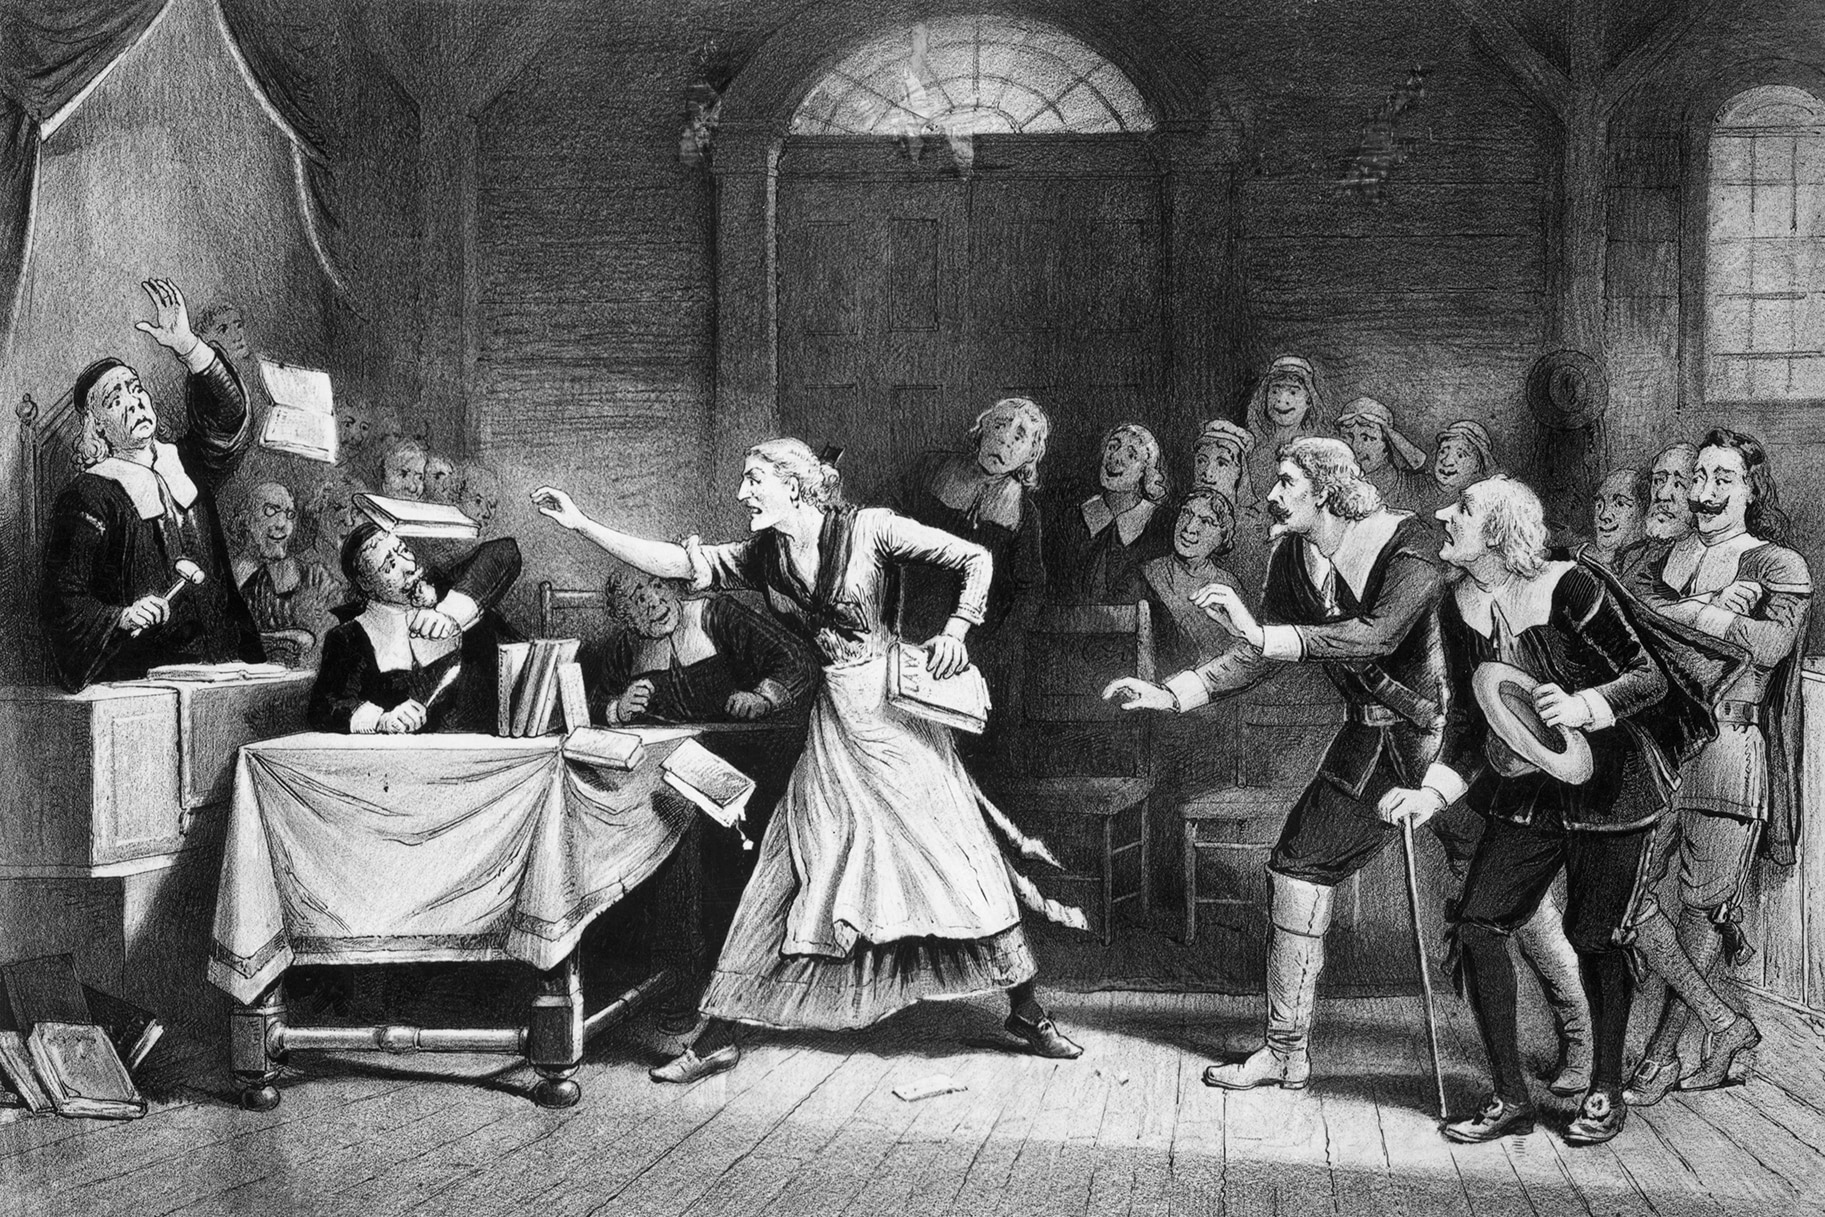 A Witch trial in Salem, Massachusetts.